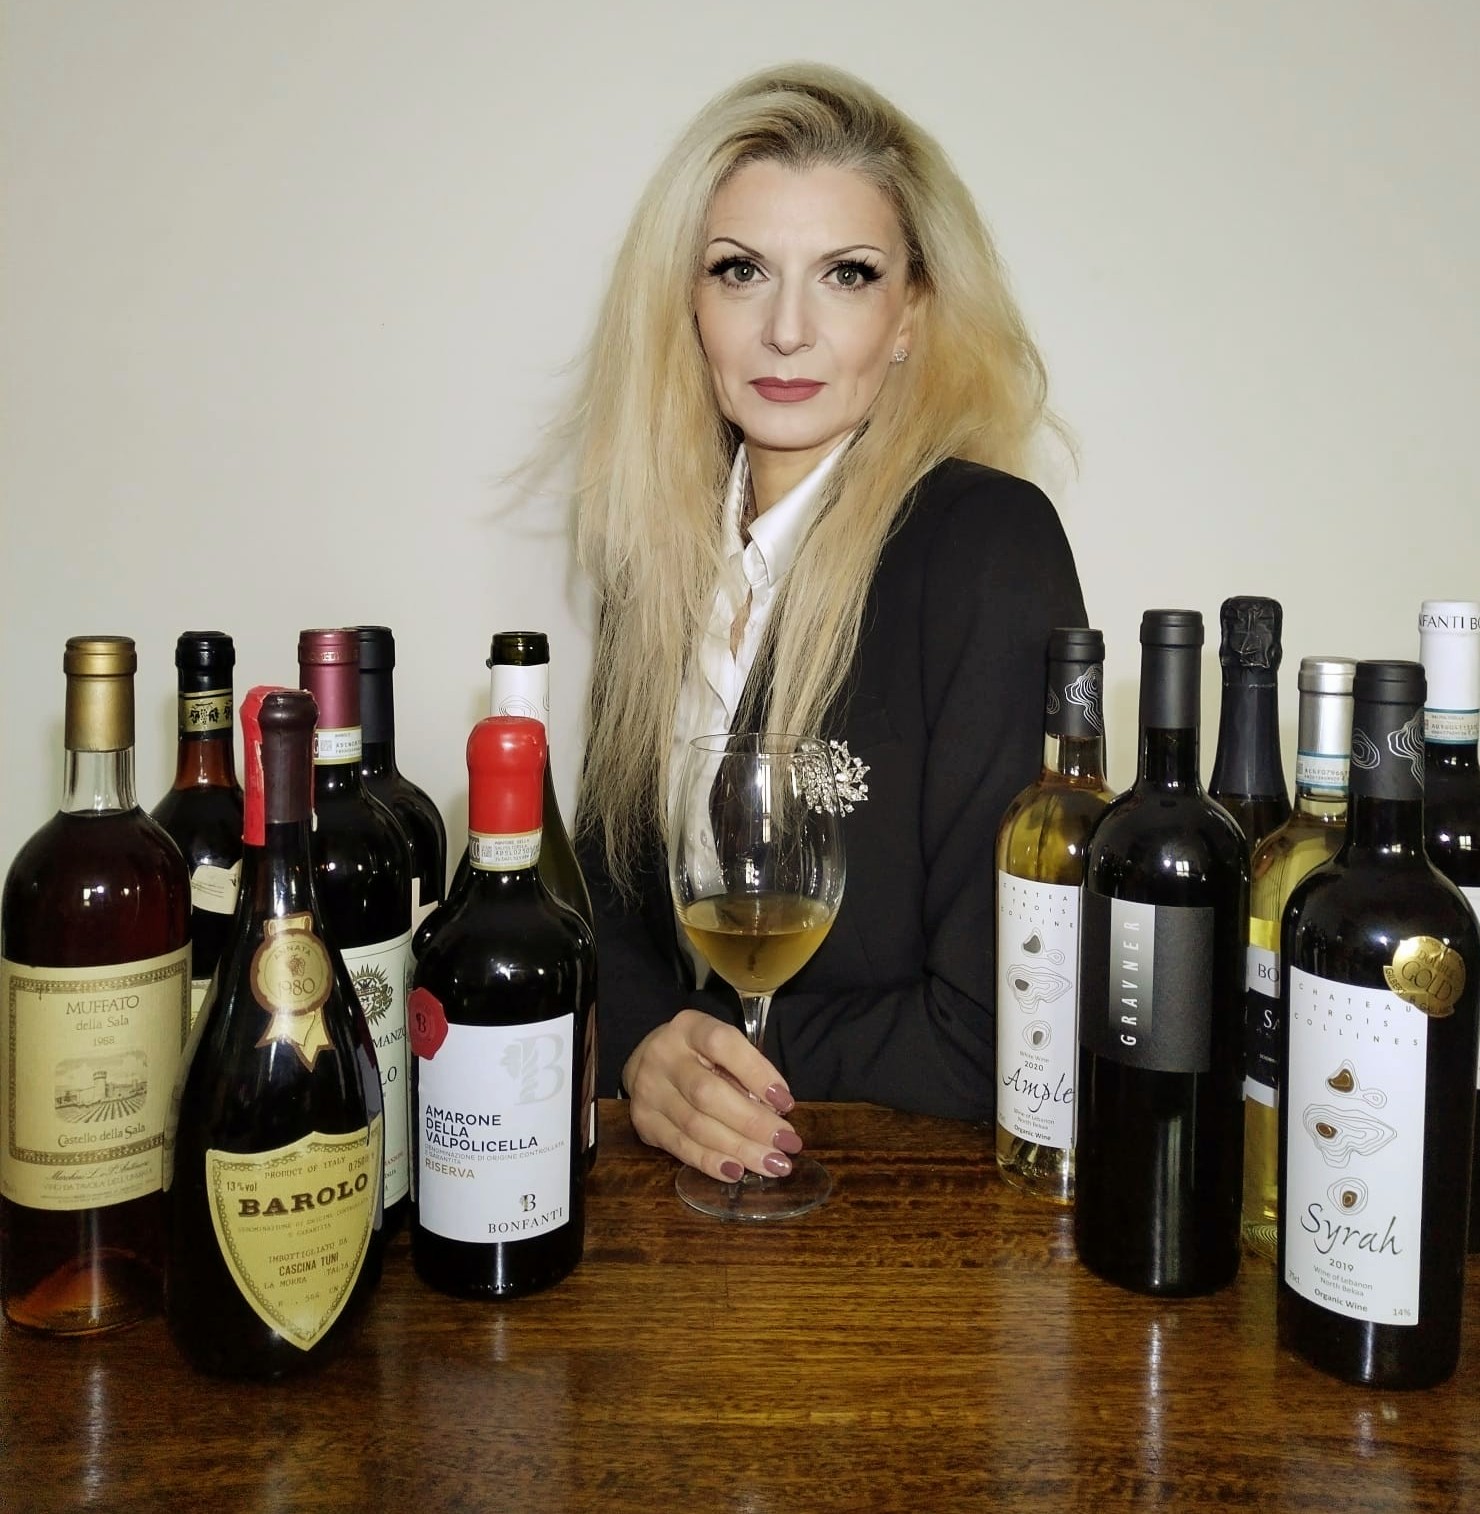 Perth sommelier expands after funding boost